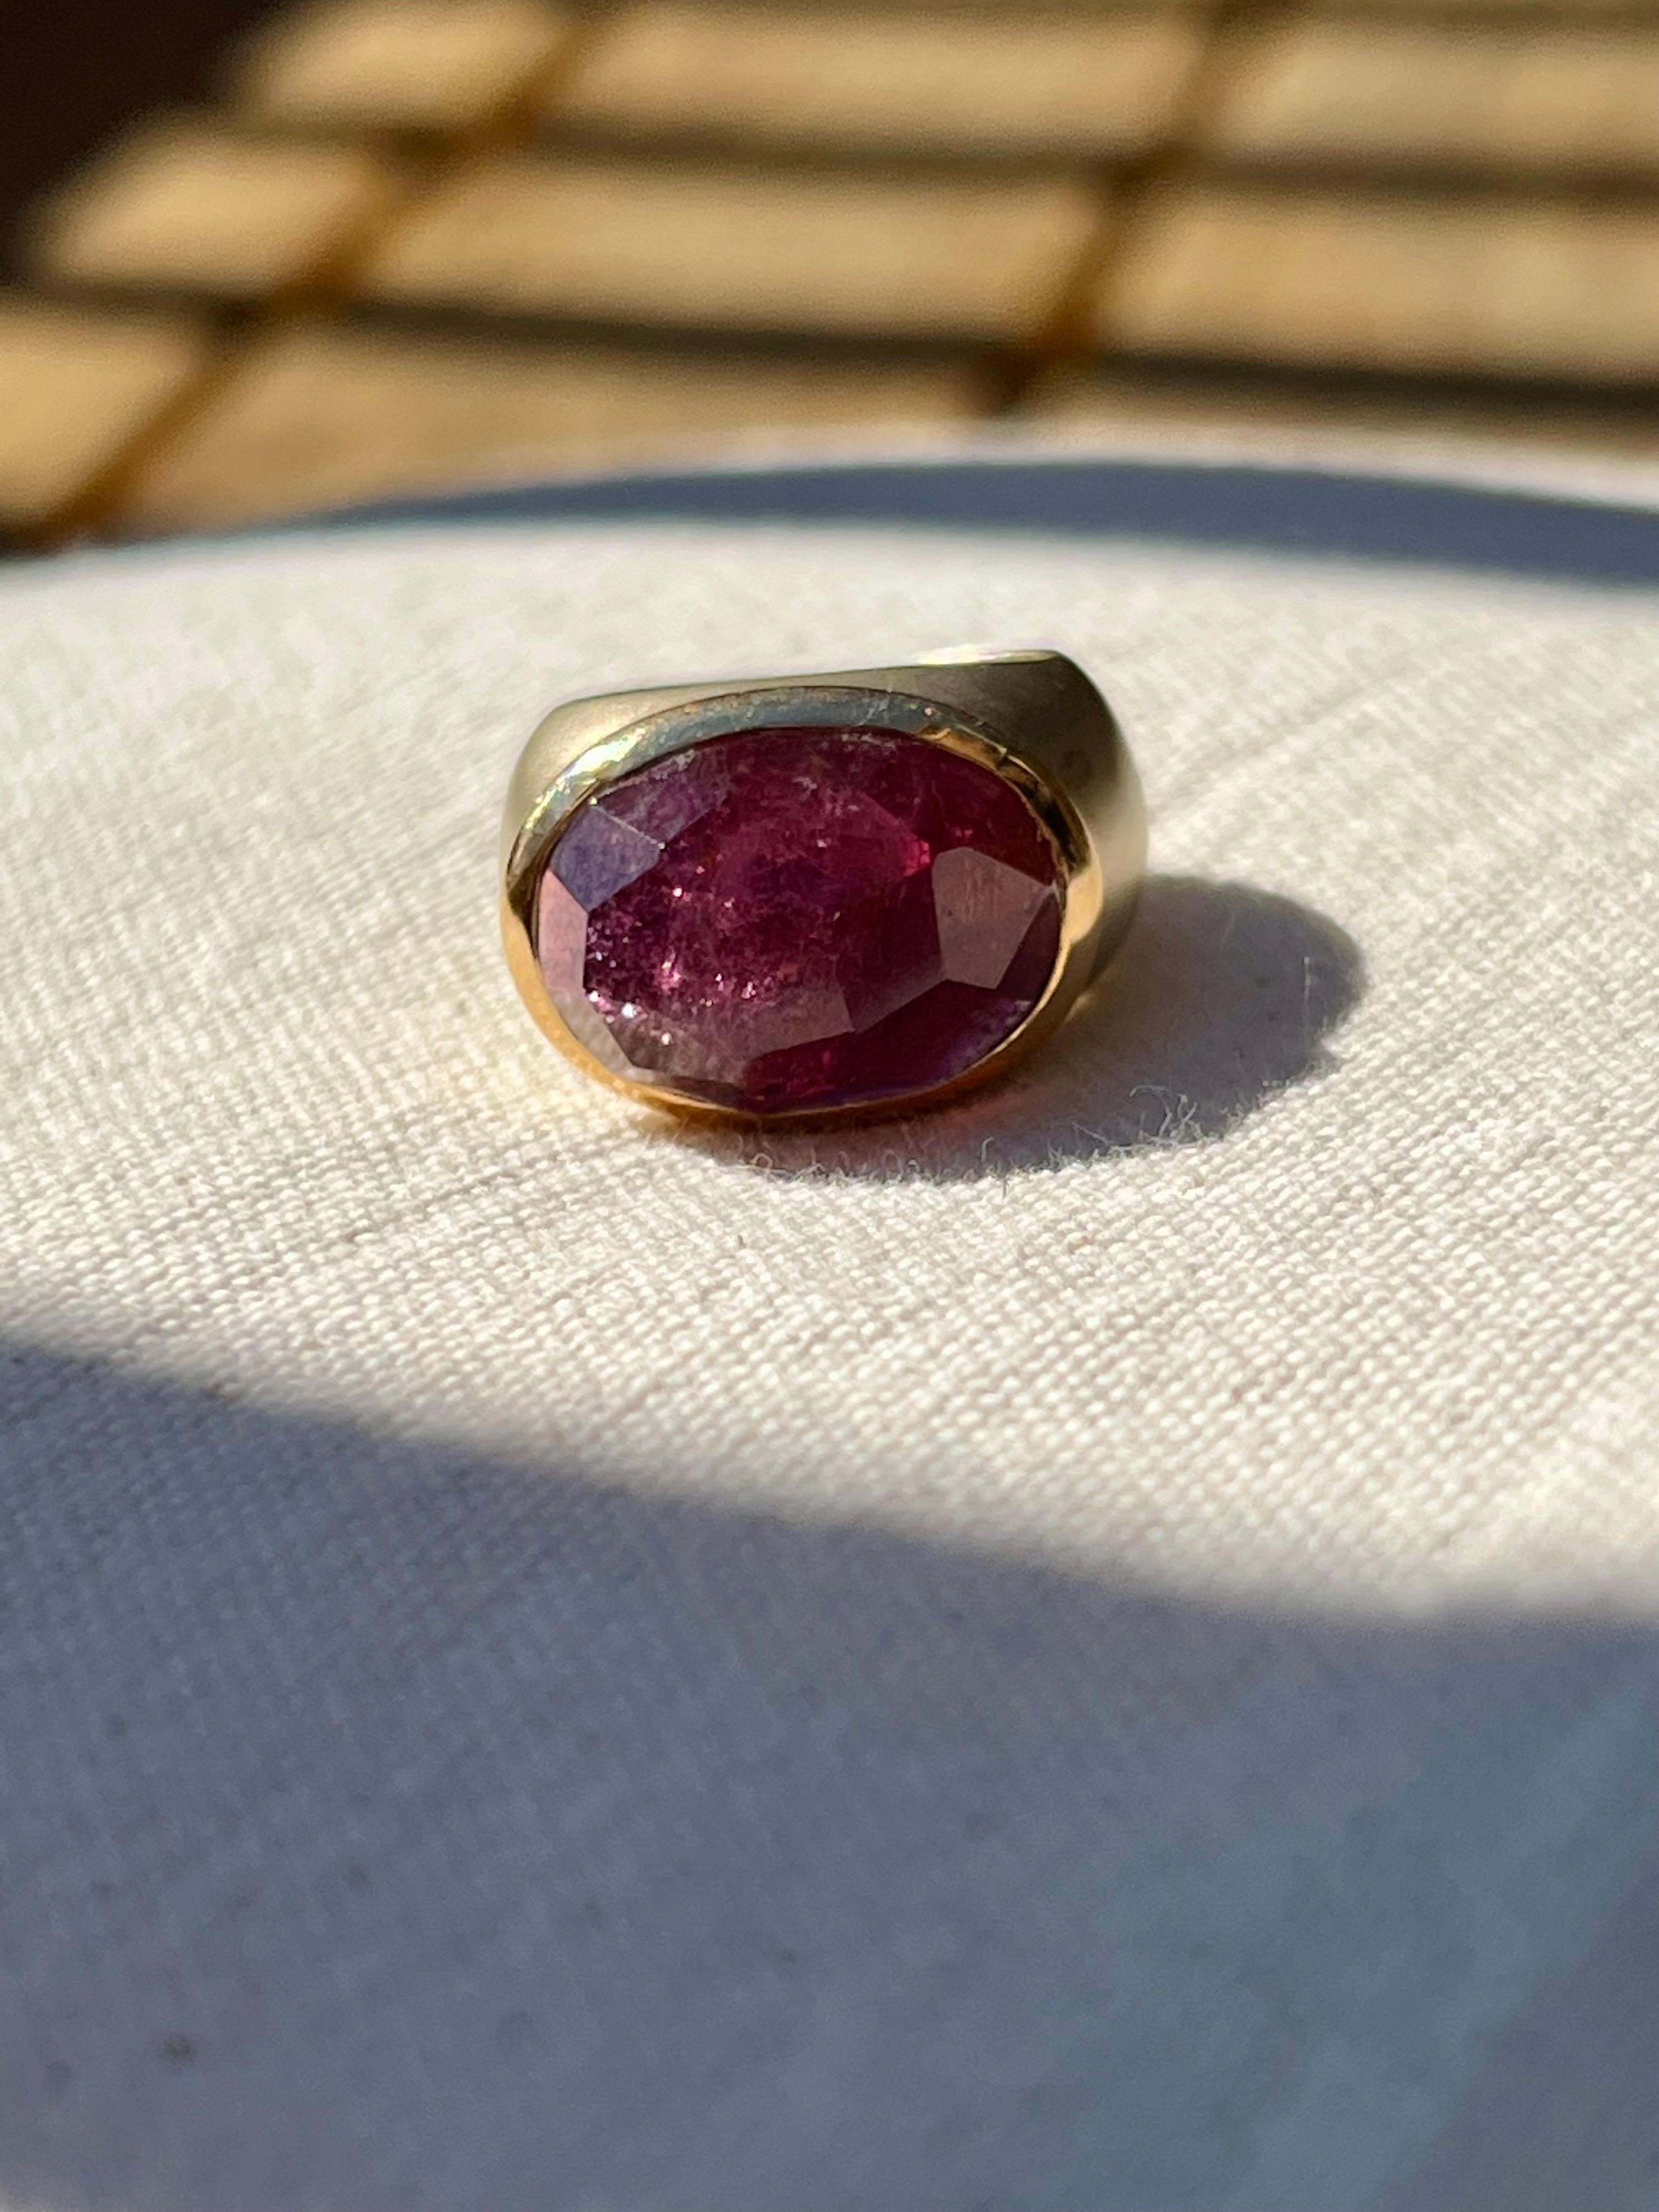 One 18 Karat Yellow gold (stamped 750 Pomellato) ring bezel set with one 18x13mm pink Tourmaline stone.  The ring is a finger size 6.5.